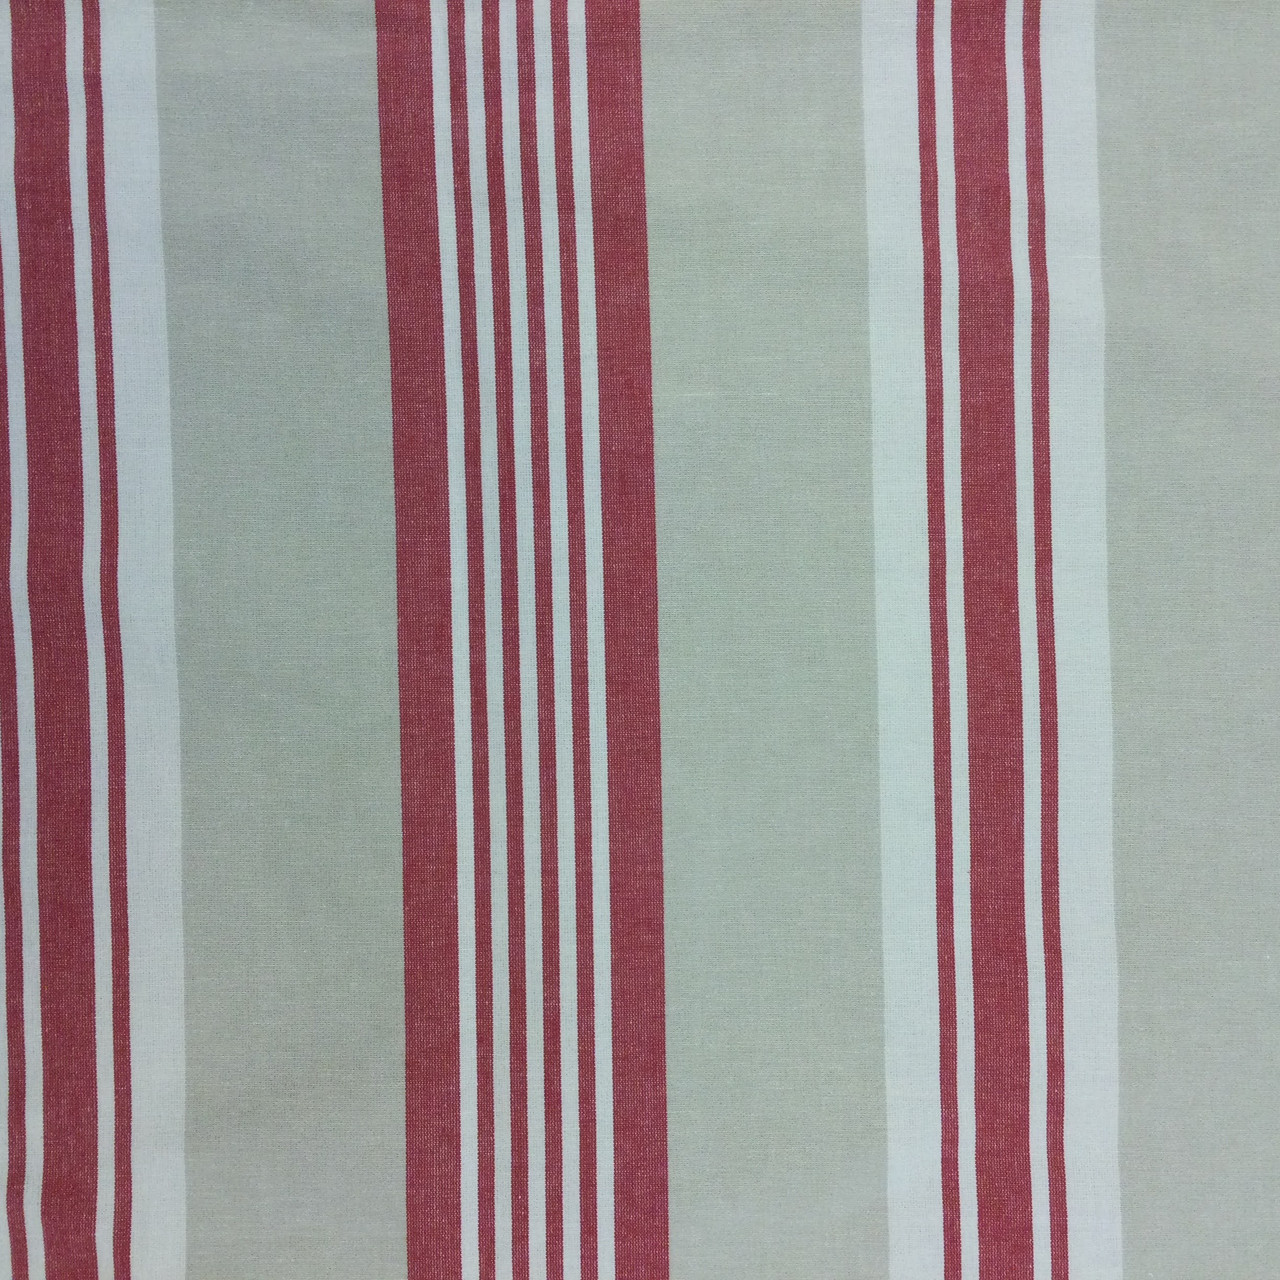 Organic red striped linen cotton clothes For Women side open Plus